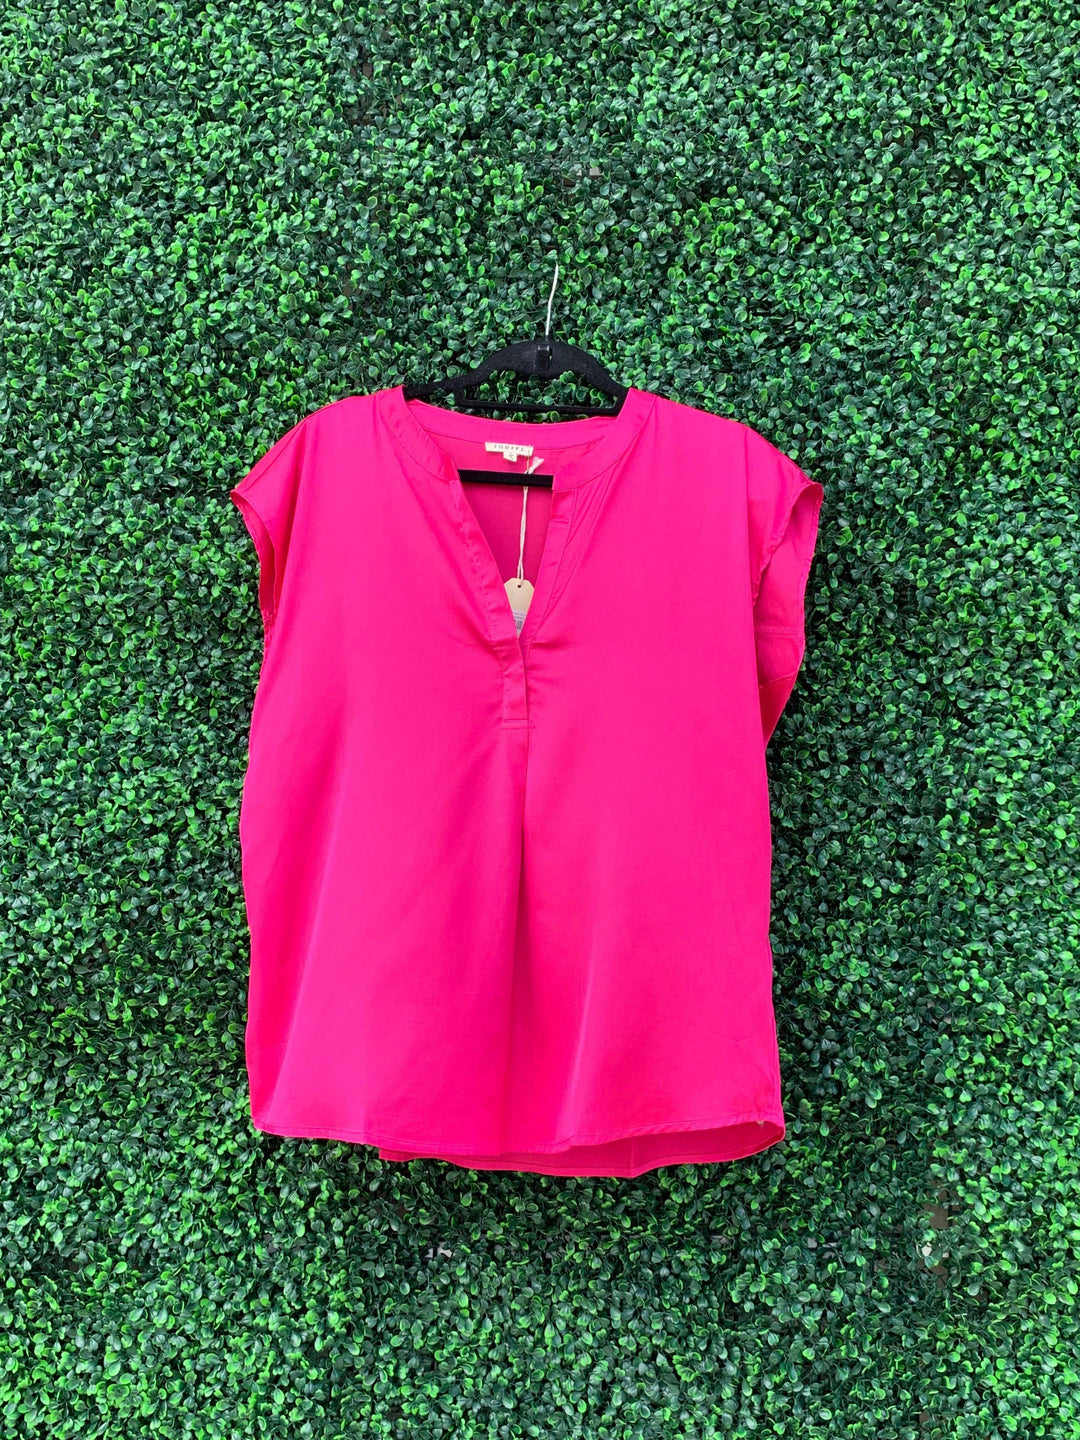 Bright pink women's top online and in store